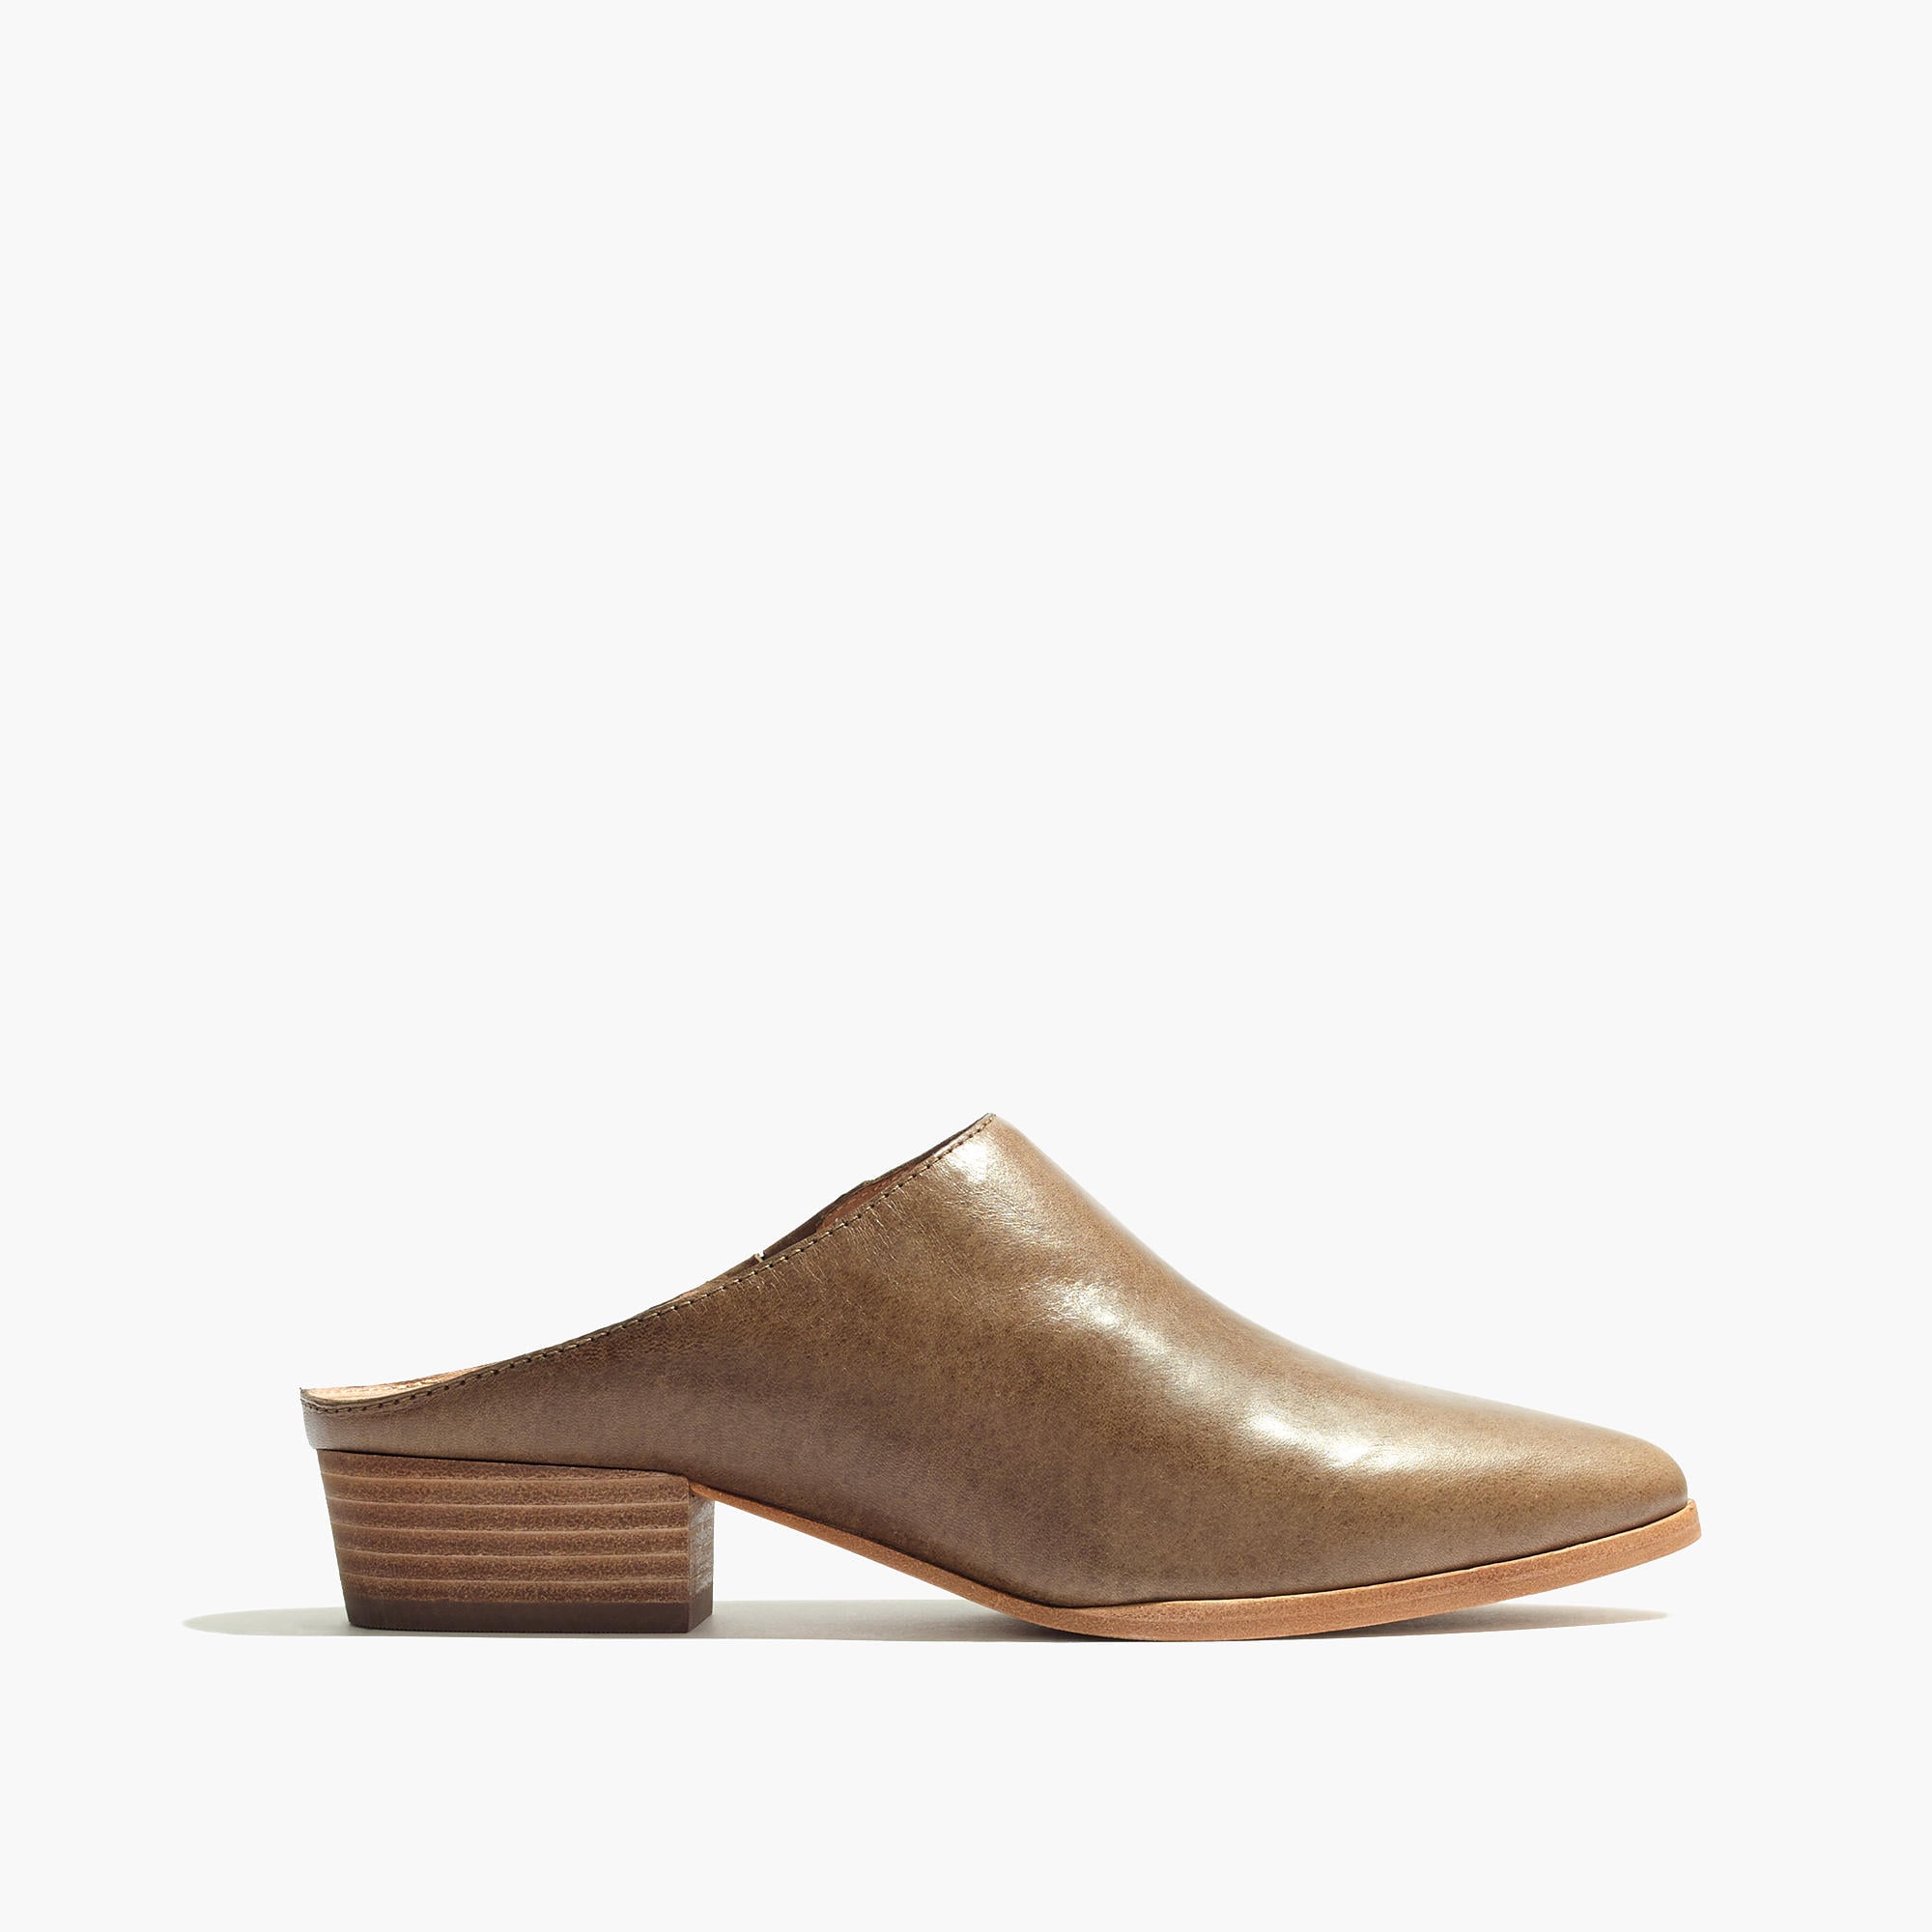 Madewell Barlow Mule ($158) | Your 